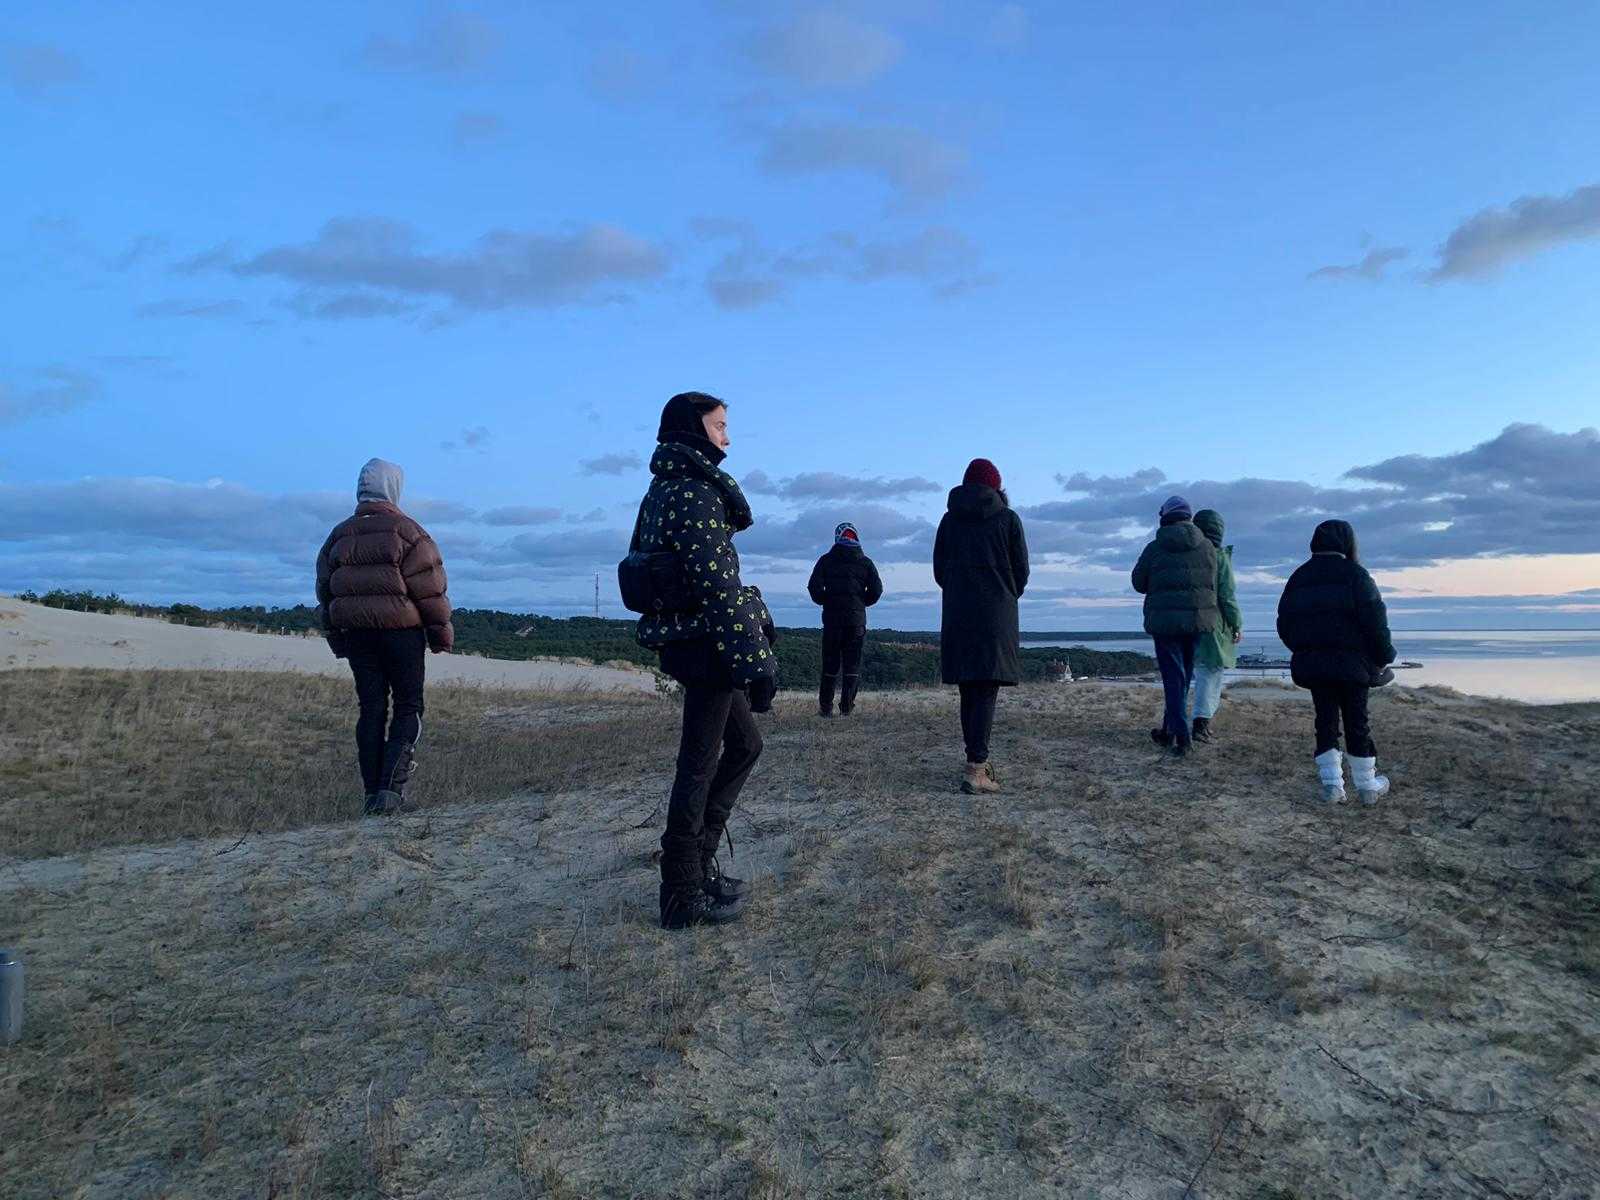 COOP study group - Publishing Practices: Textauralities, Oralitures, Corpoliteracies: Slow Walking to the sunrise. Nida, January 2023. Photo credit: Mayra A. Rodríguez Castro.